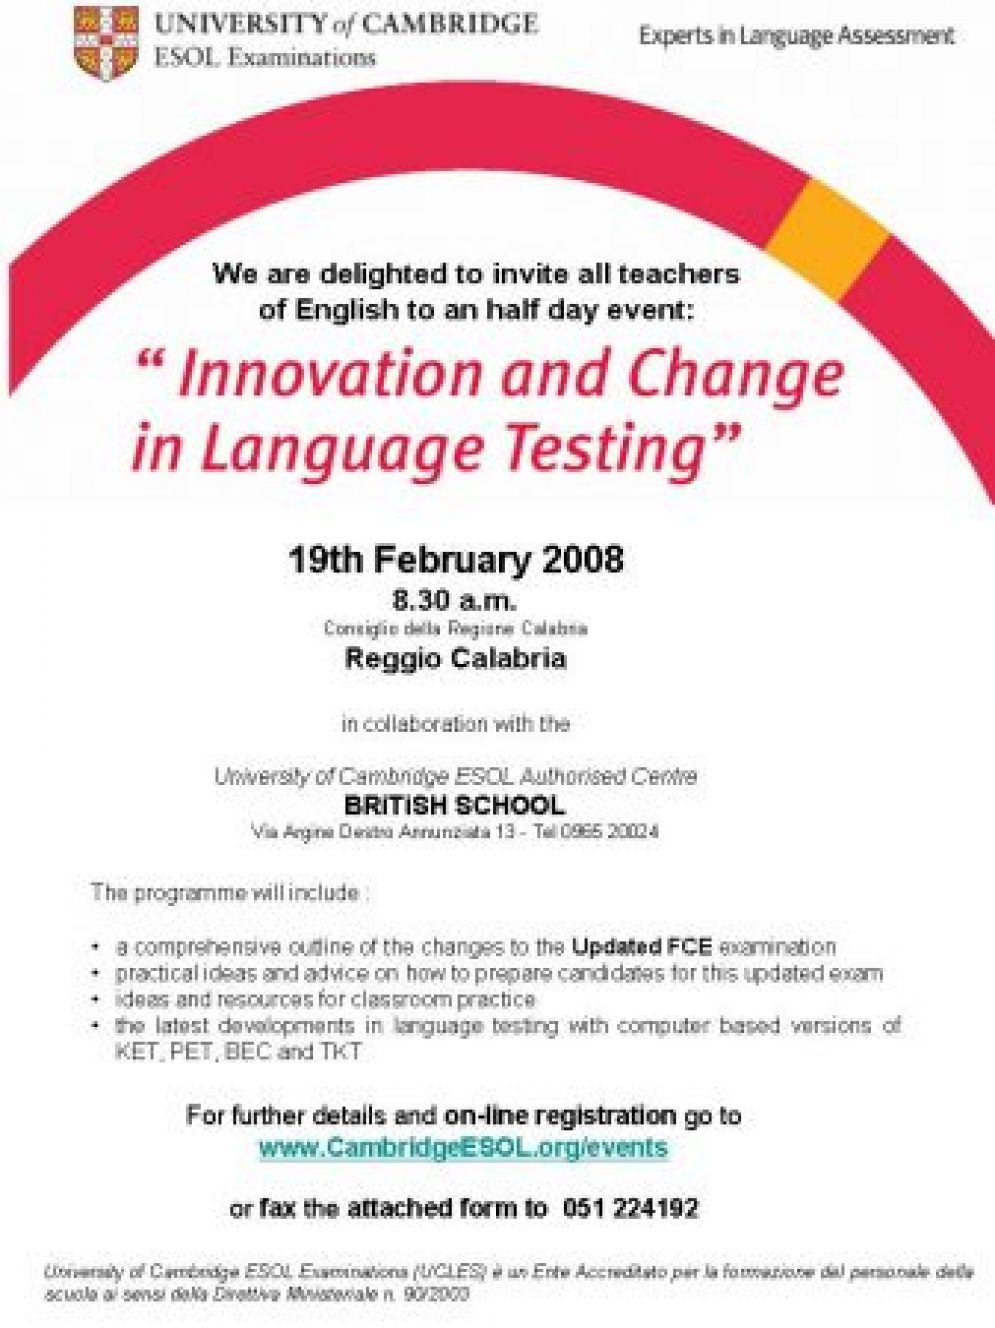 INNOVATION AND CHANGE IN LANGUAGE TESTING